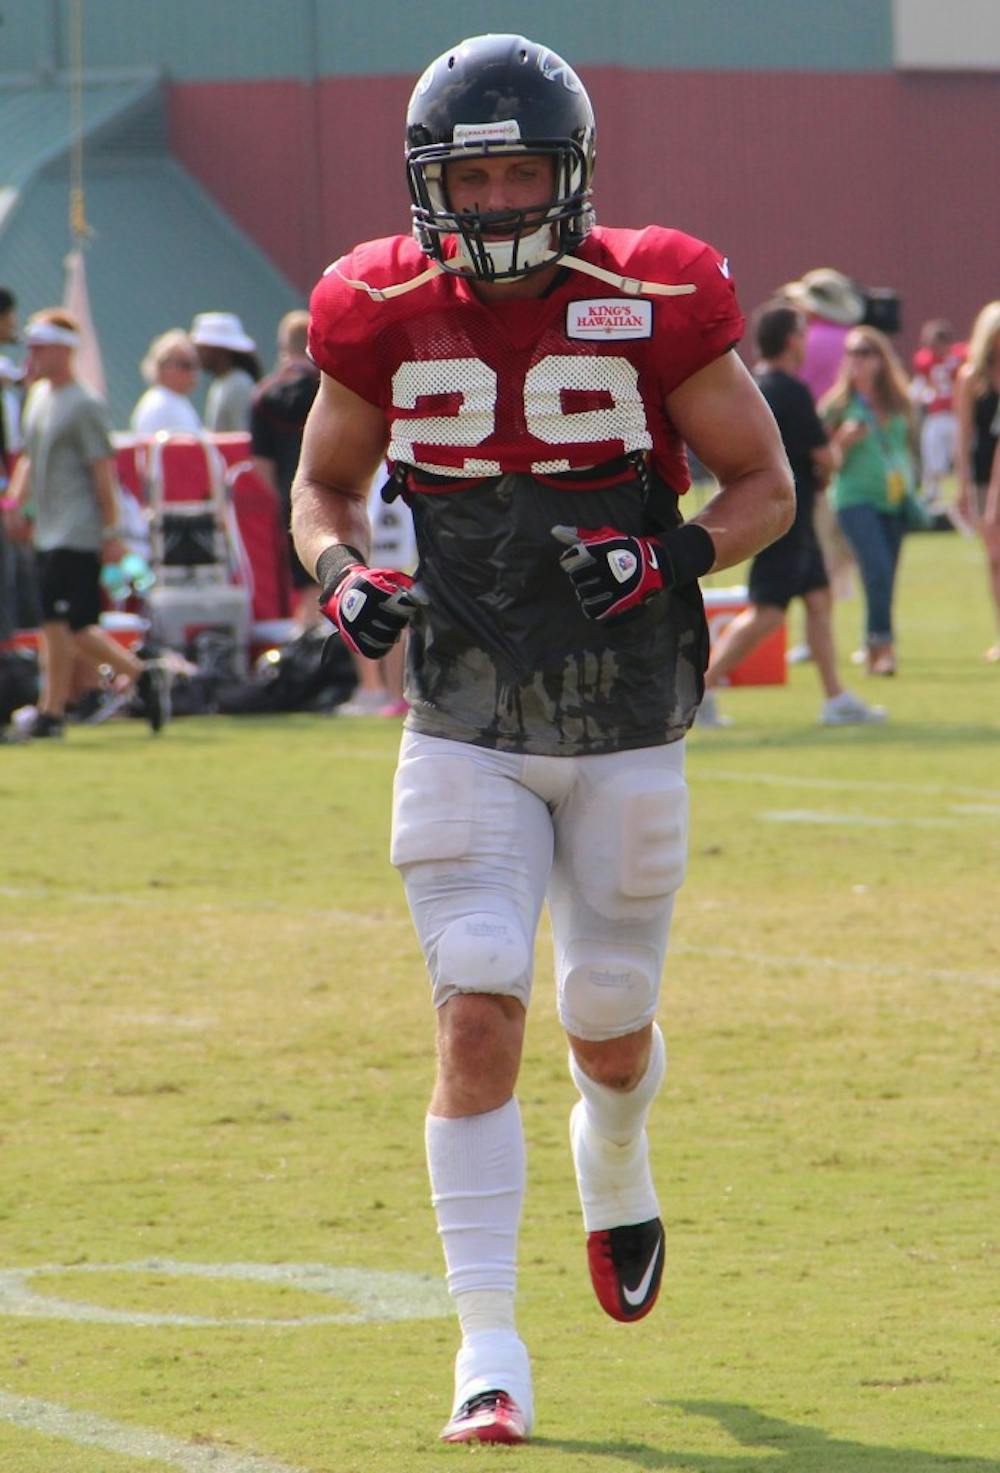 <p>Sean Baker takes part in practice during his stint with the Atlanta Falcons. Baker was released by the Falcons after training camp, and the Colts signed Baker to the practice squad on Oct. 29. <em>PHOTO COURTESY OF WIKIMEDIA COMMONS</em></p>